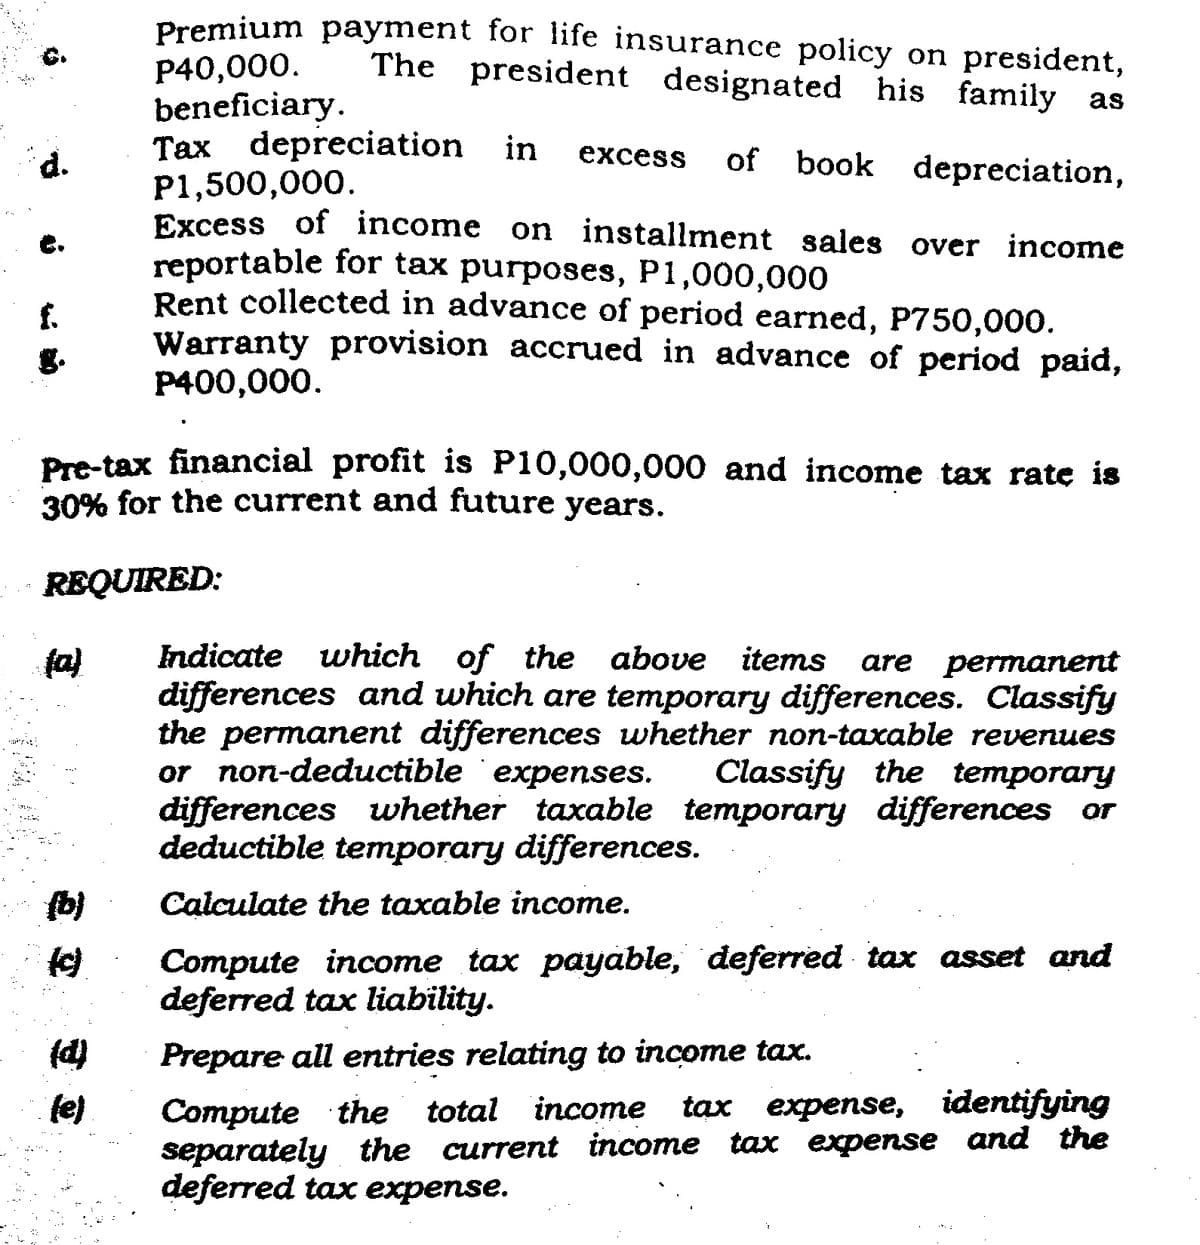 d.
f.
30
Pre-tax financial profit is P10,000,000 and income tax rate is
30% for the current and future years.
REQUIRED:
(a)
(b)
(c)
Premium payment for life insurance policy on president,
P40,000.
The president designated his family as
beneficiary.
Tax depreciation in excess
P1,500,000.
of book depreciation,
Excess of income on installment sales over income
reportable for tax purposes, P1,000,000
Rent collected in advance of period earned, P750,000.
Warranty provision accrued in advance of period paid,
P400,000.
(d)
(e)
Indicate which of the above items are permanent
differences and which are temporary differences. Classify
the permanent differences whether non-taxable revenues
or non-deductible expenses. Classify the temporary
differences whether taxable temporary differences or
deductible temporary differences.
Calculate the taxable income.
Compute income tax payable, deferred tax asset and
deferred tax liability.
Prepare all entries relating to income tax.
Compute the total income tax expense, identifying
separately the current income tax expense and the
deferred tax expense.